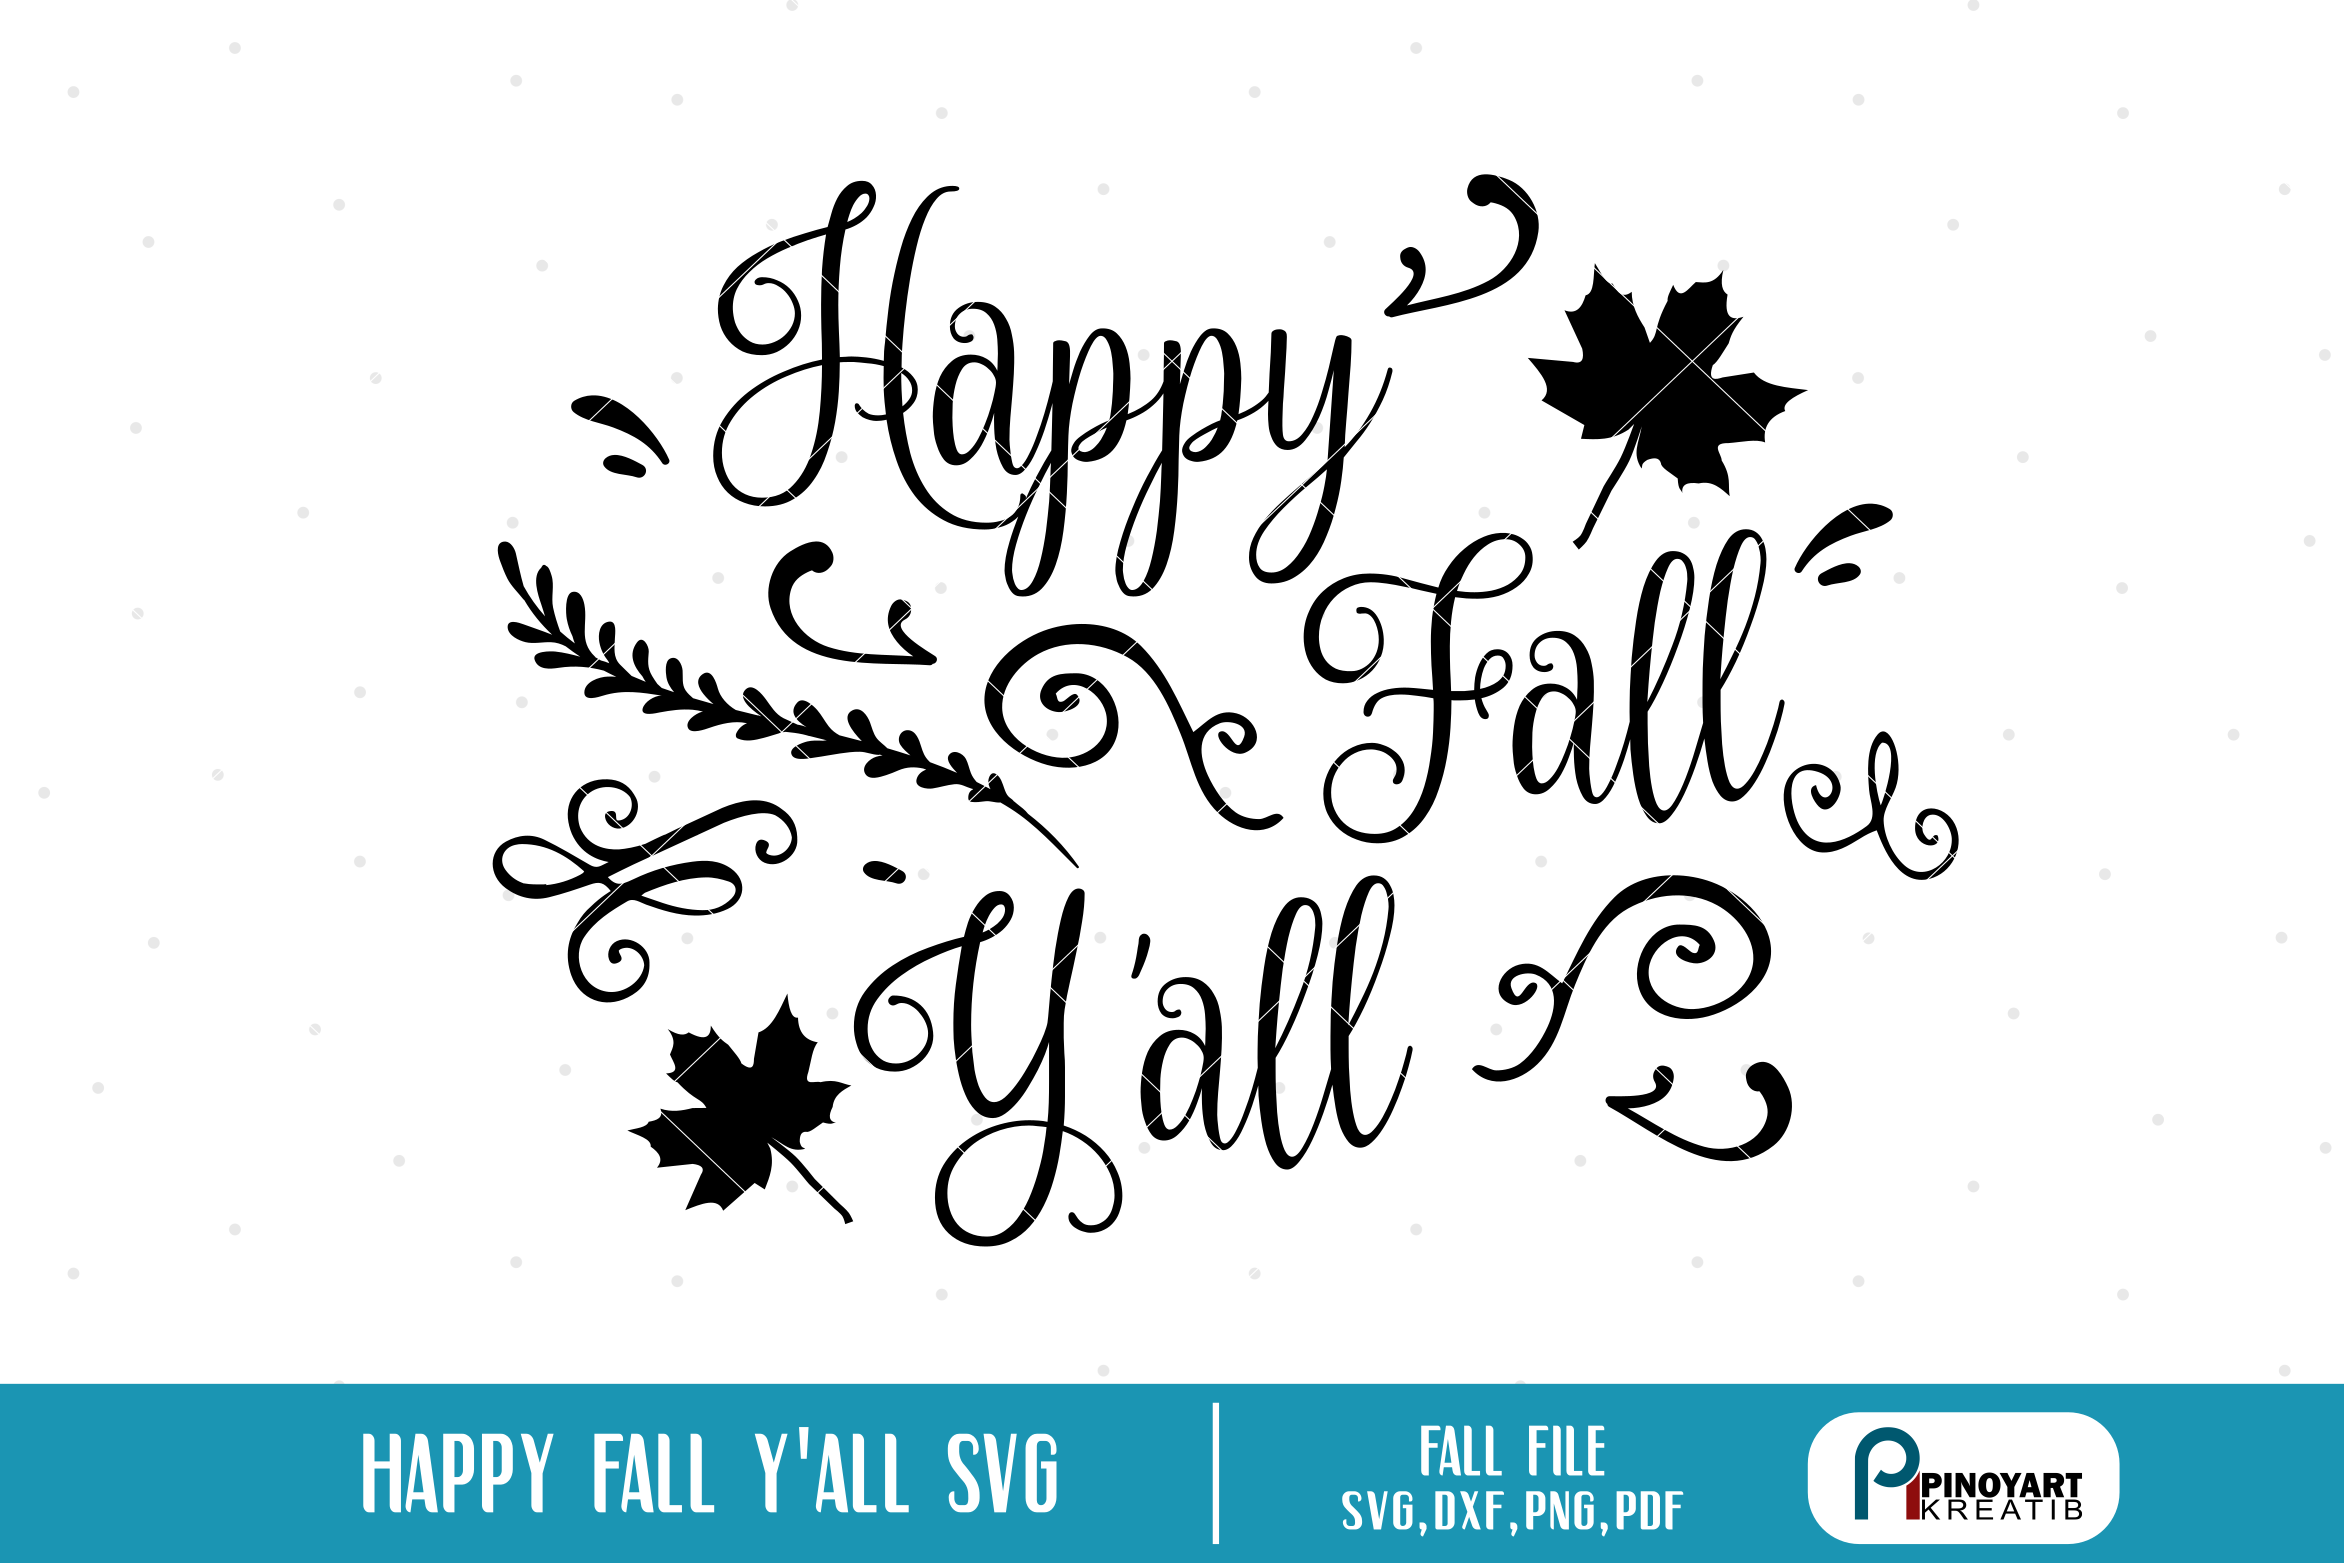 Download happy fall y'all svg,happy fall y'all svg file,fall svg file